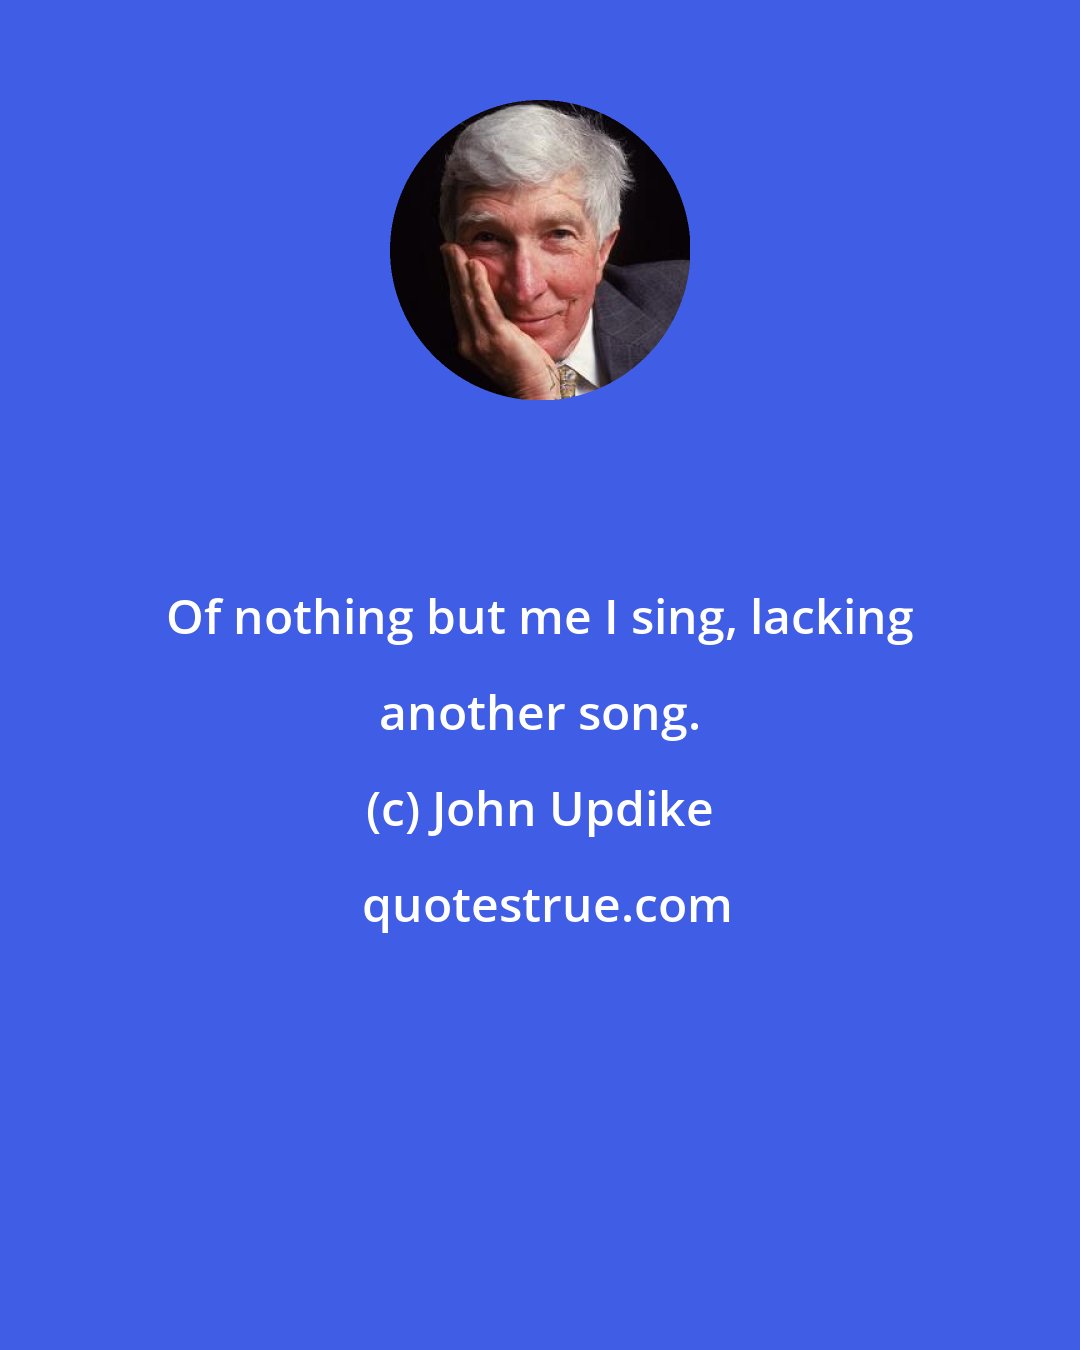 John Updike: Of nothing but me I sing, lacking another song.